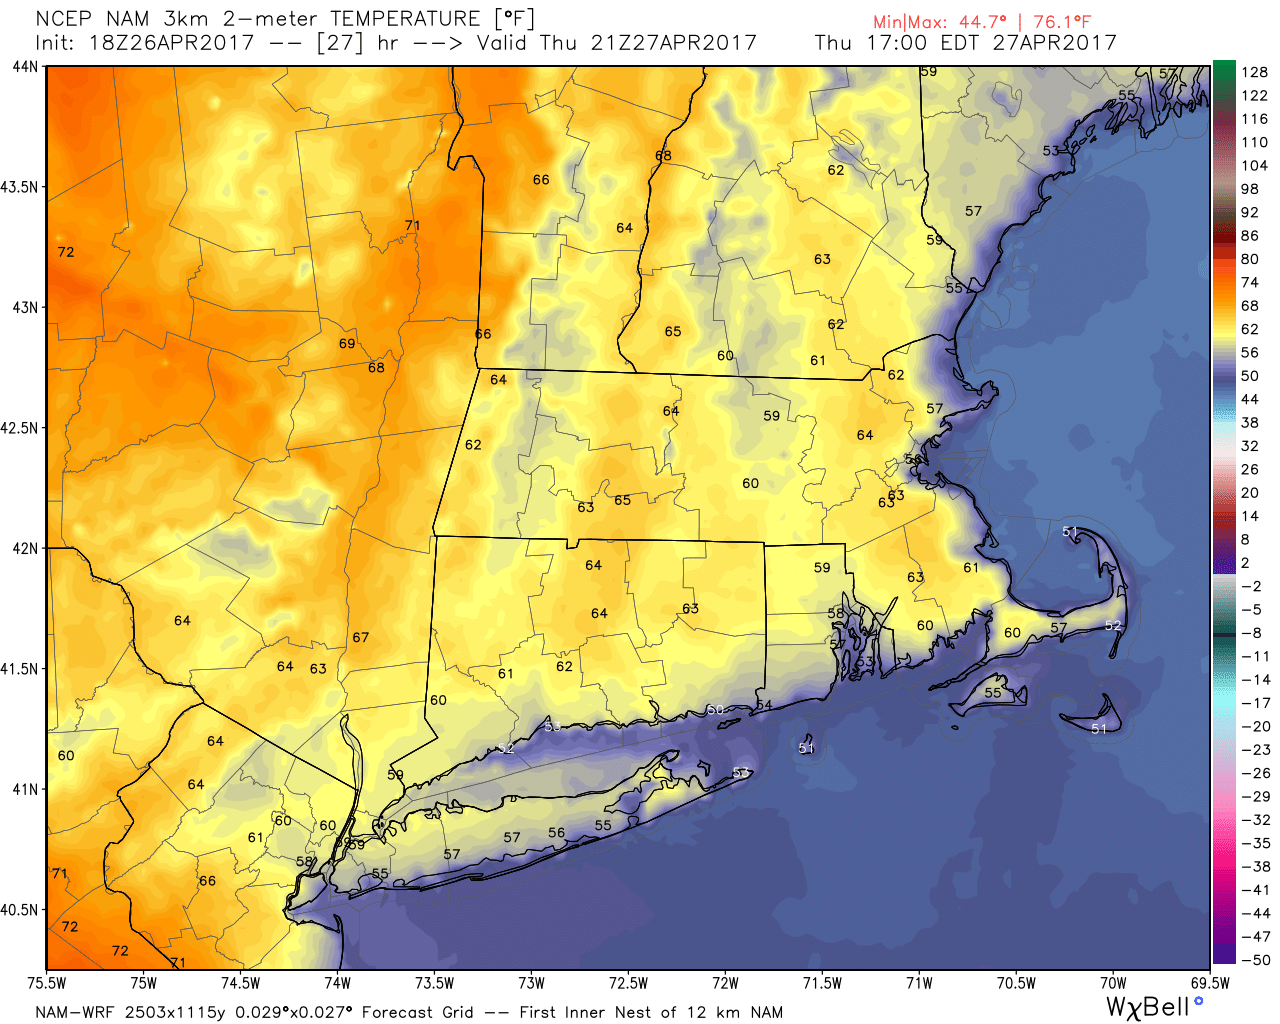 Temperatures will be coolest along the coast this afternoon and evening with a sea breeze. (Courtesy WeatherBell)